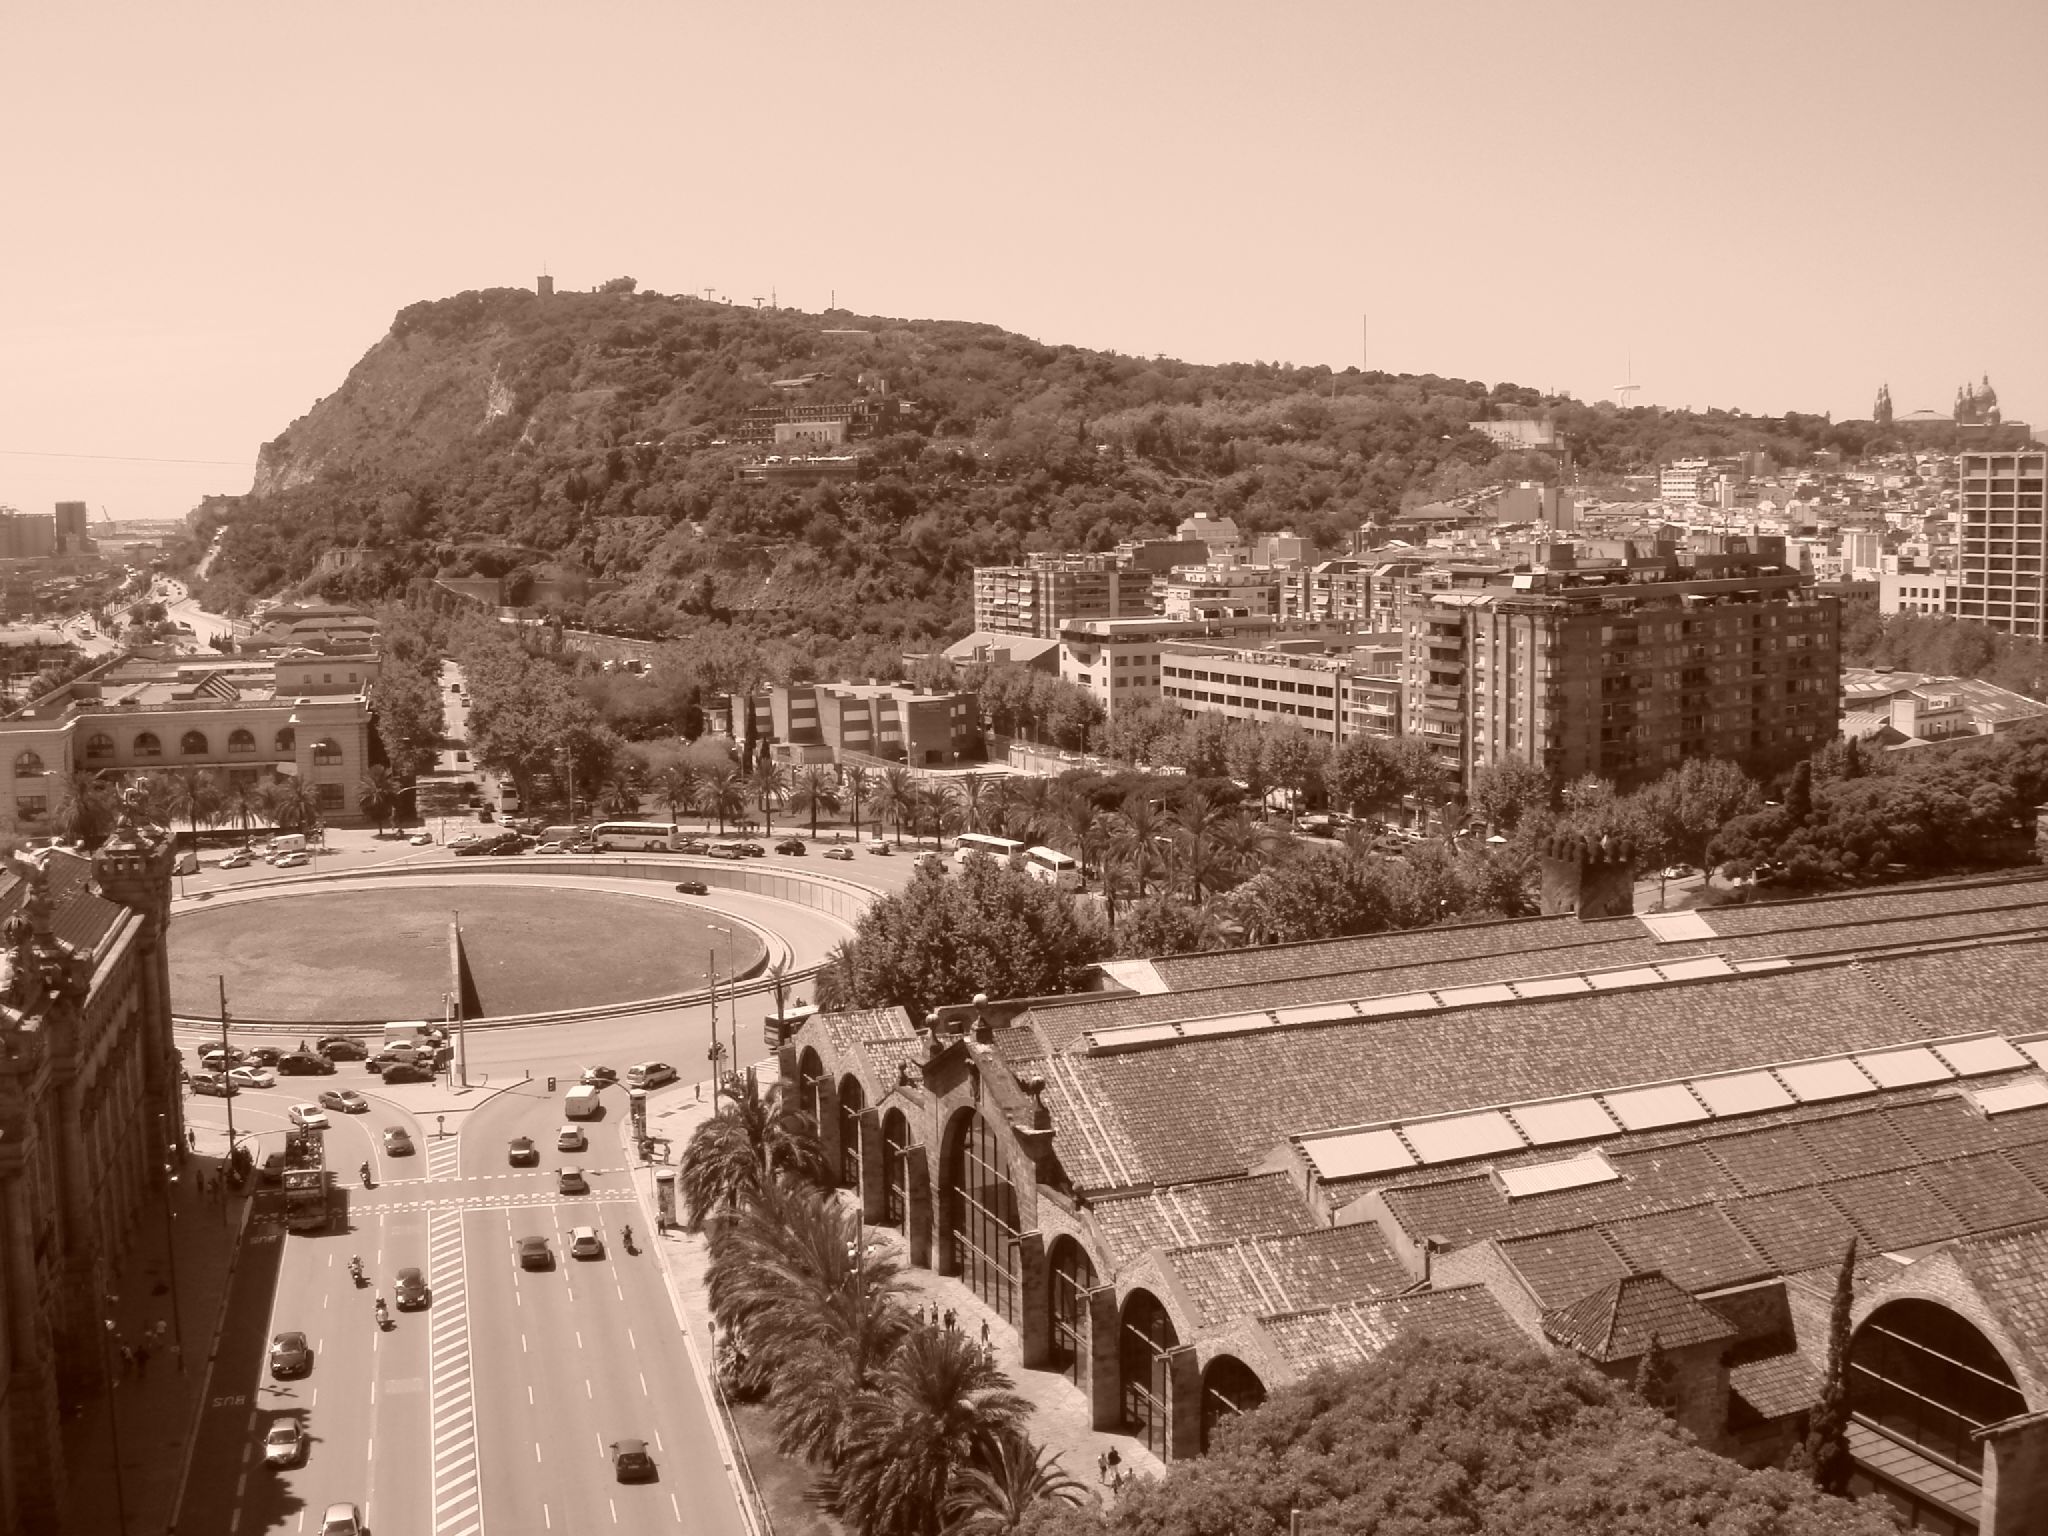 black and white image of a city with a large hill